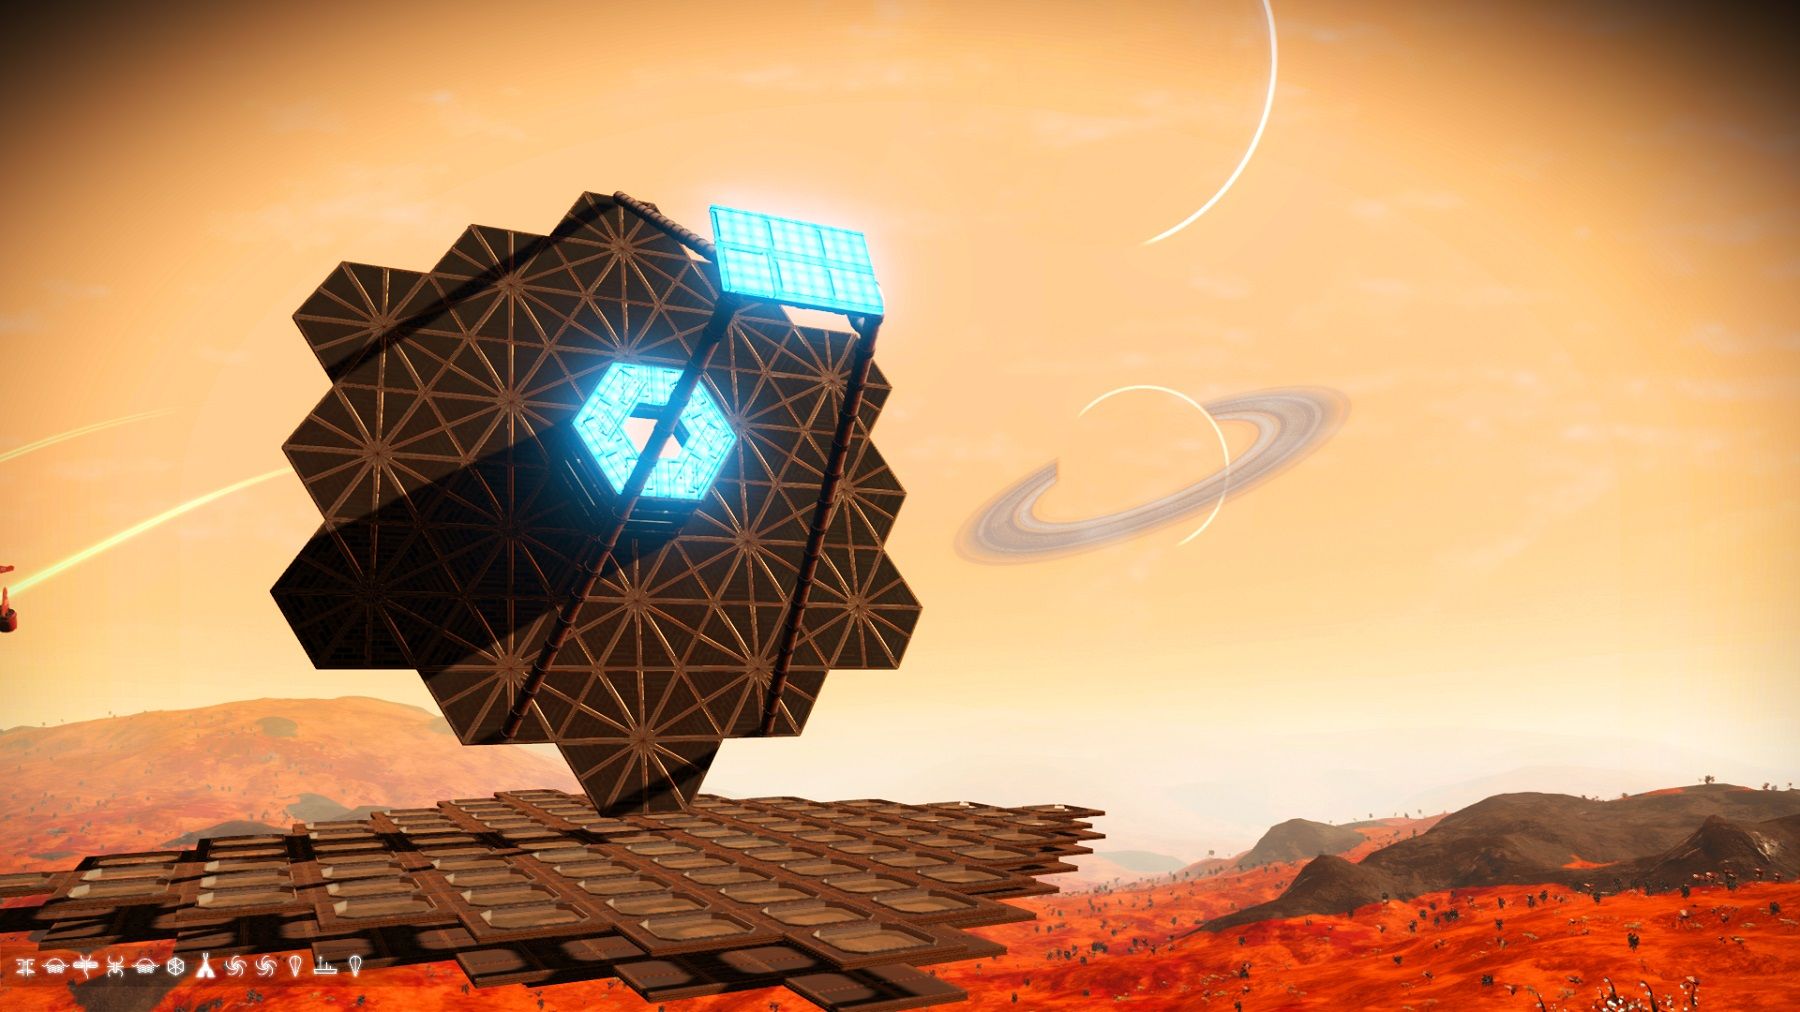 Screenshot from No Man's Sky showing a digital reconstruction of the James Webb Telescope.